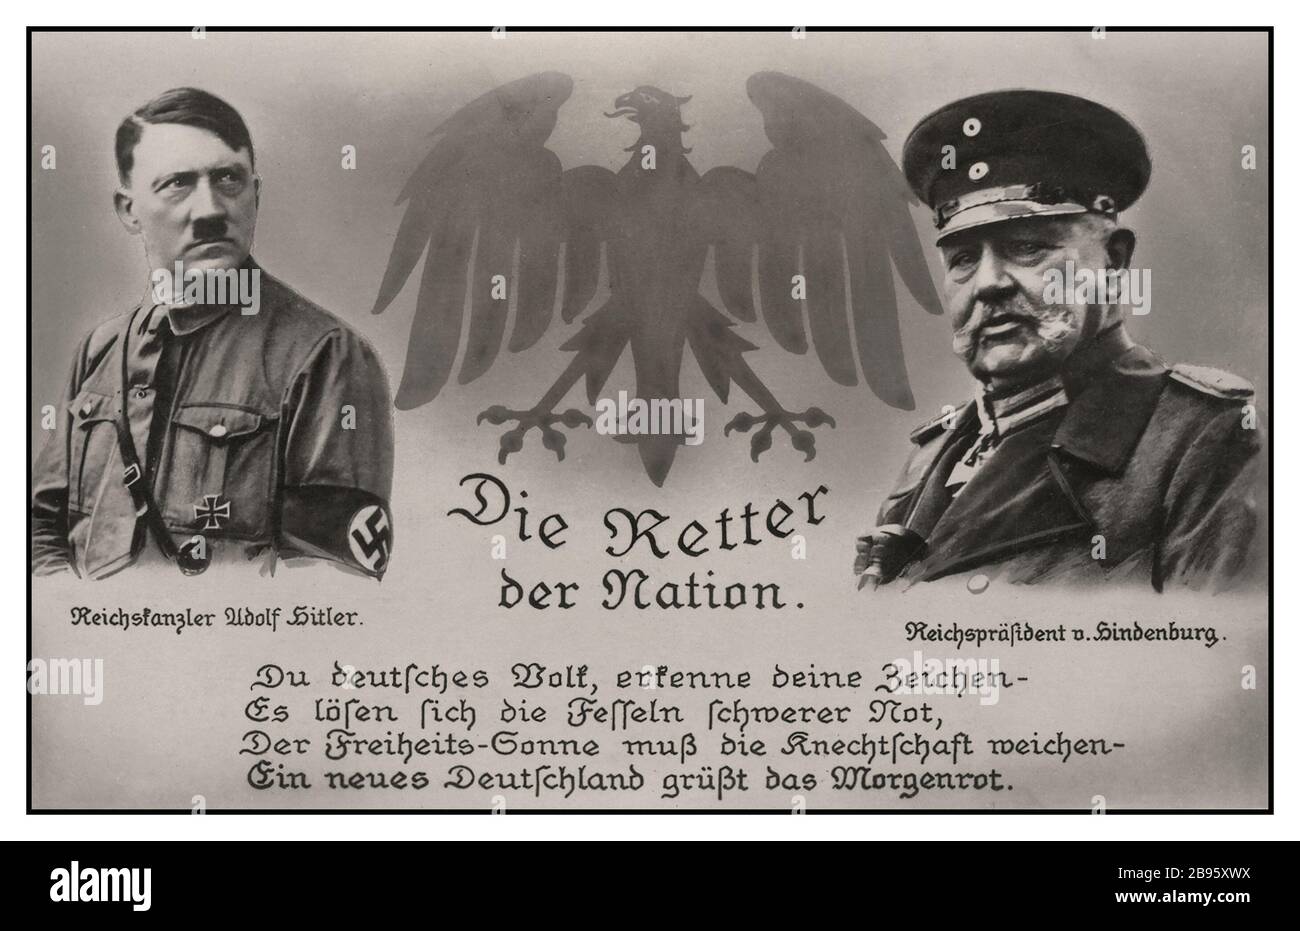 HINDENBURG HITLER 'Die Ketter der Nation' Vintage 1930's Nazi Germany Propaganda Poster Postcard of Reich President Hindenburg (right) who appointed Adolf Hitler as Chancellor in 1933. Soon after, Adolf Hitler assumed full powers. Reichstanzler Adolf Hitler and Reichsprasident Von Hindenburg  Die Ketter der Nation  ' The Saviour of The Nation' Stock Photo